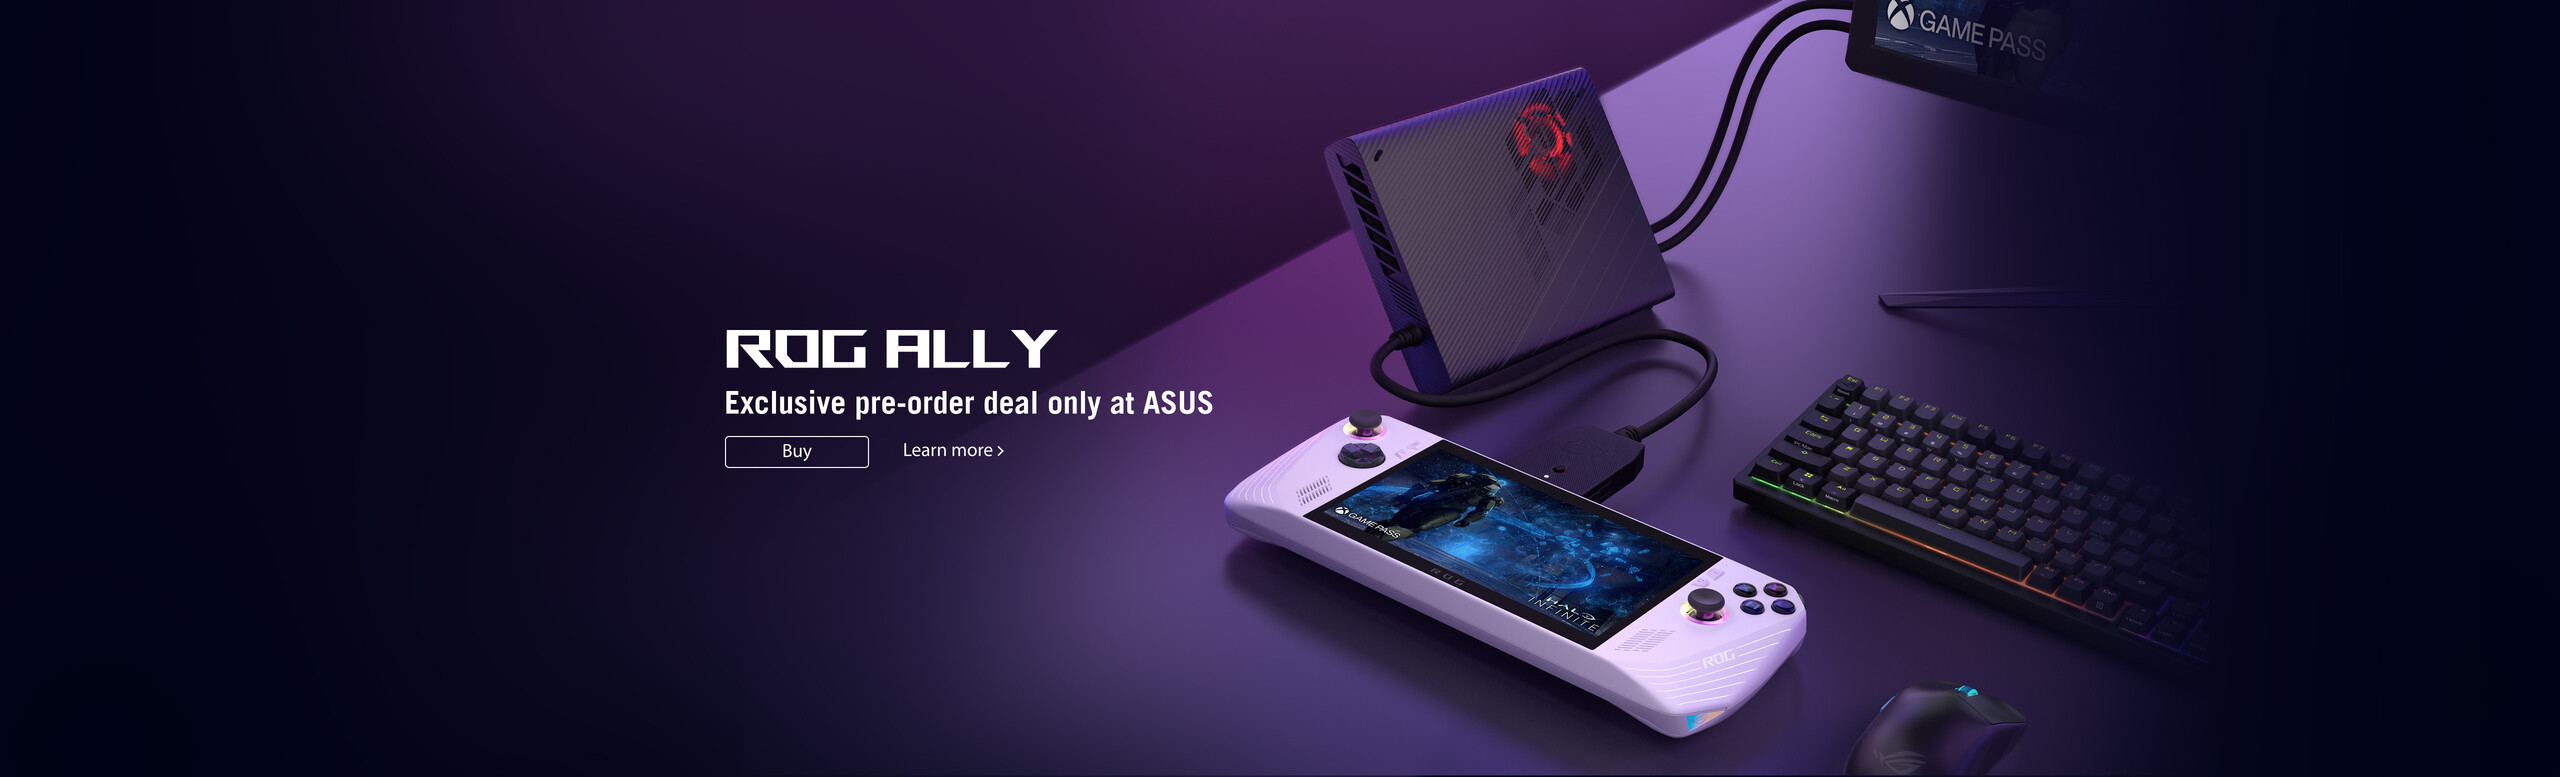 asus-events